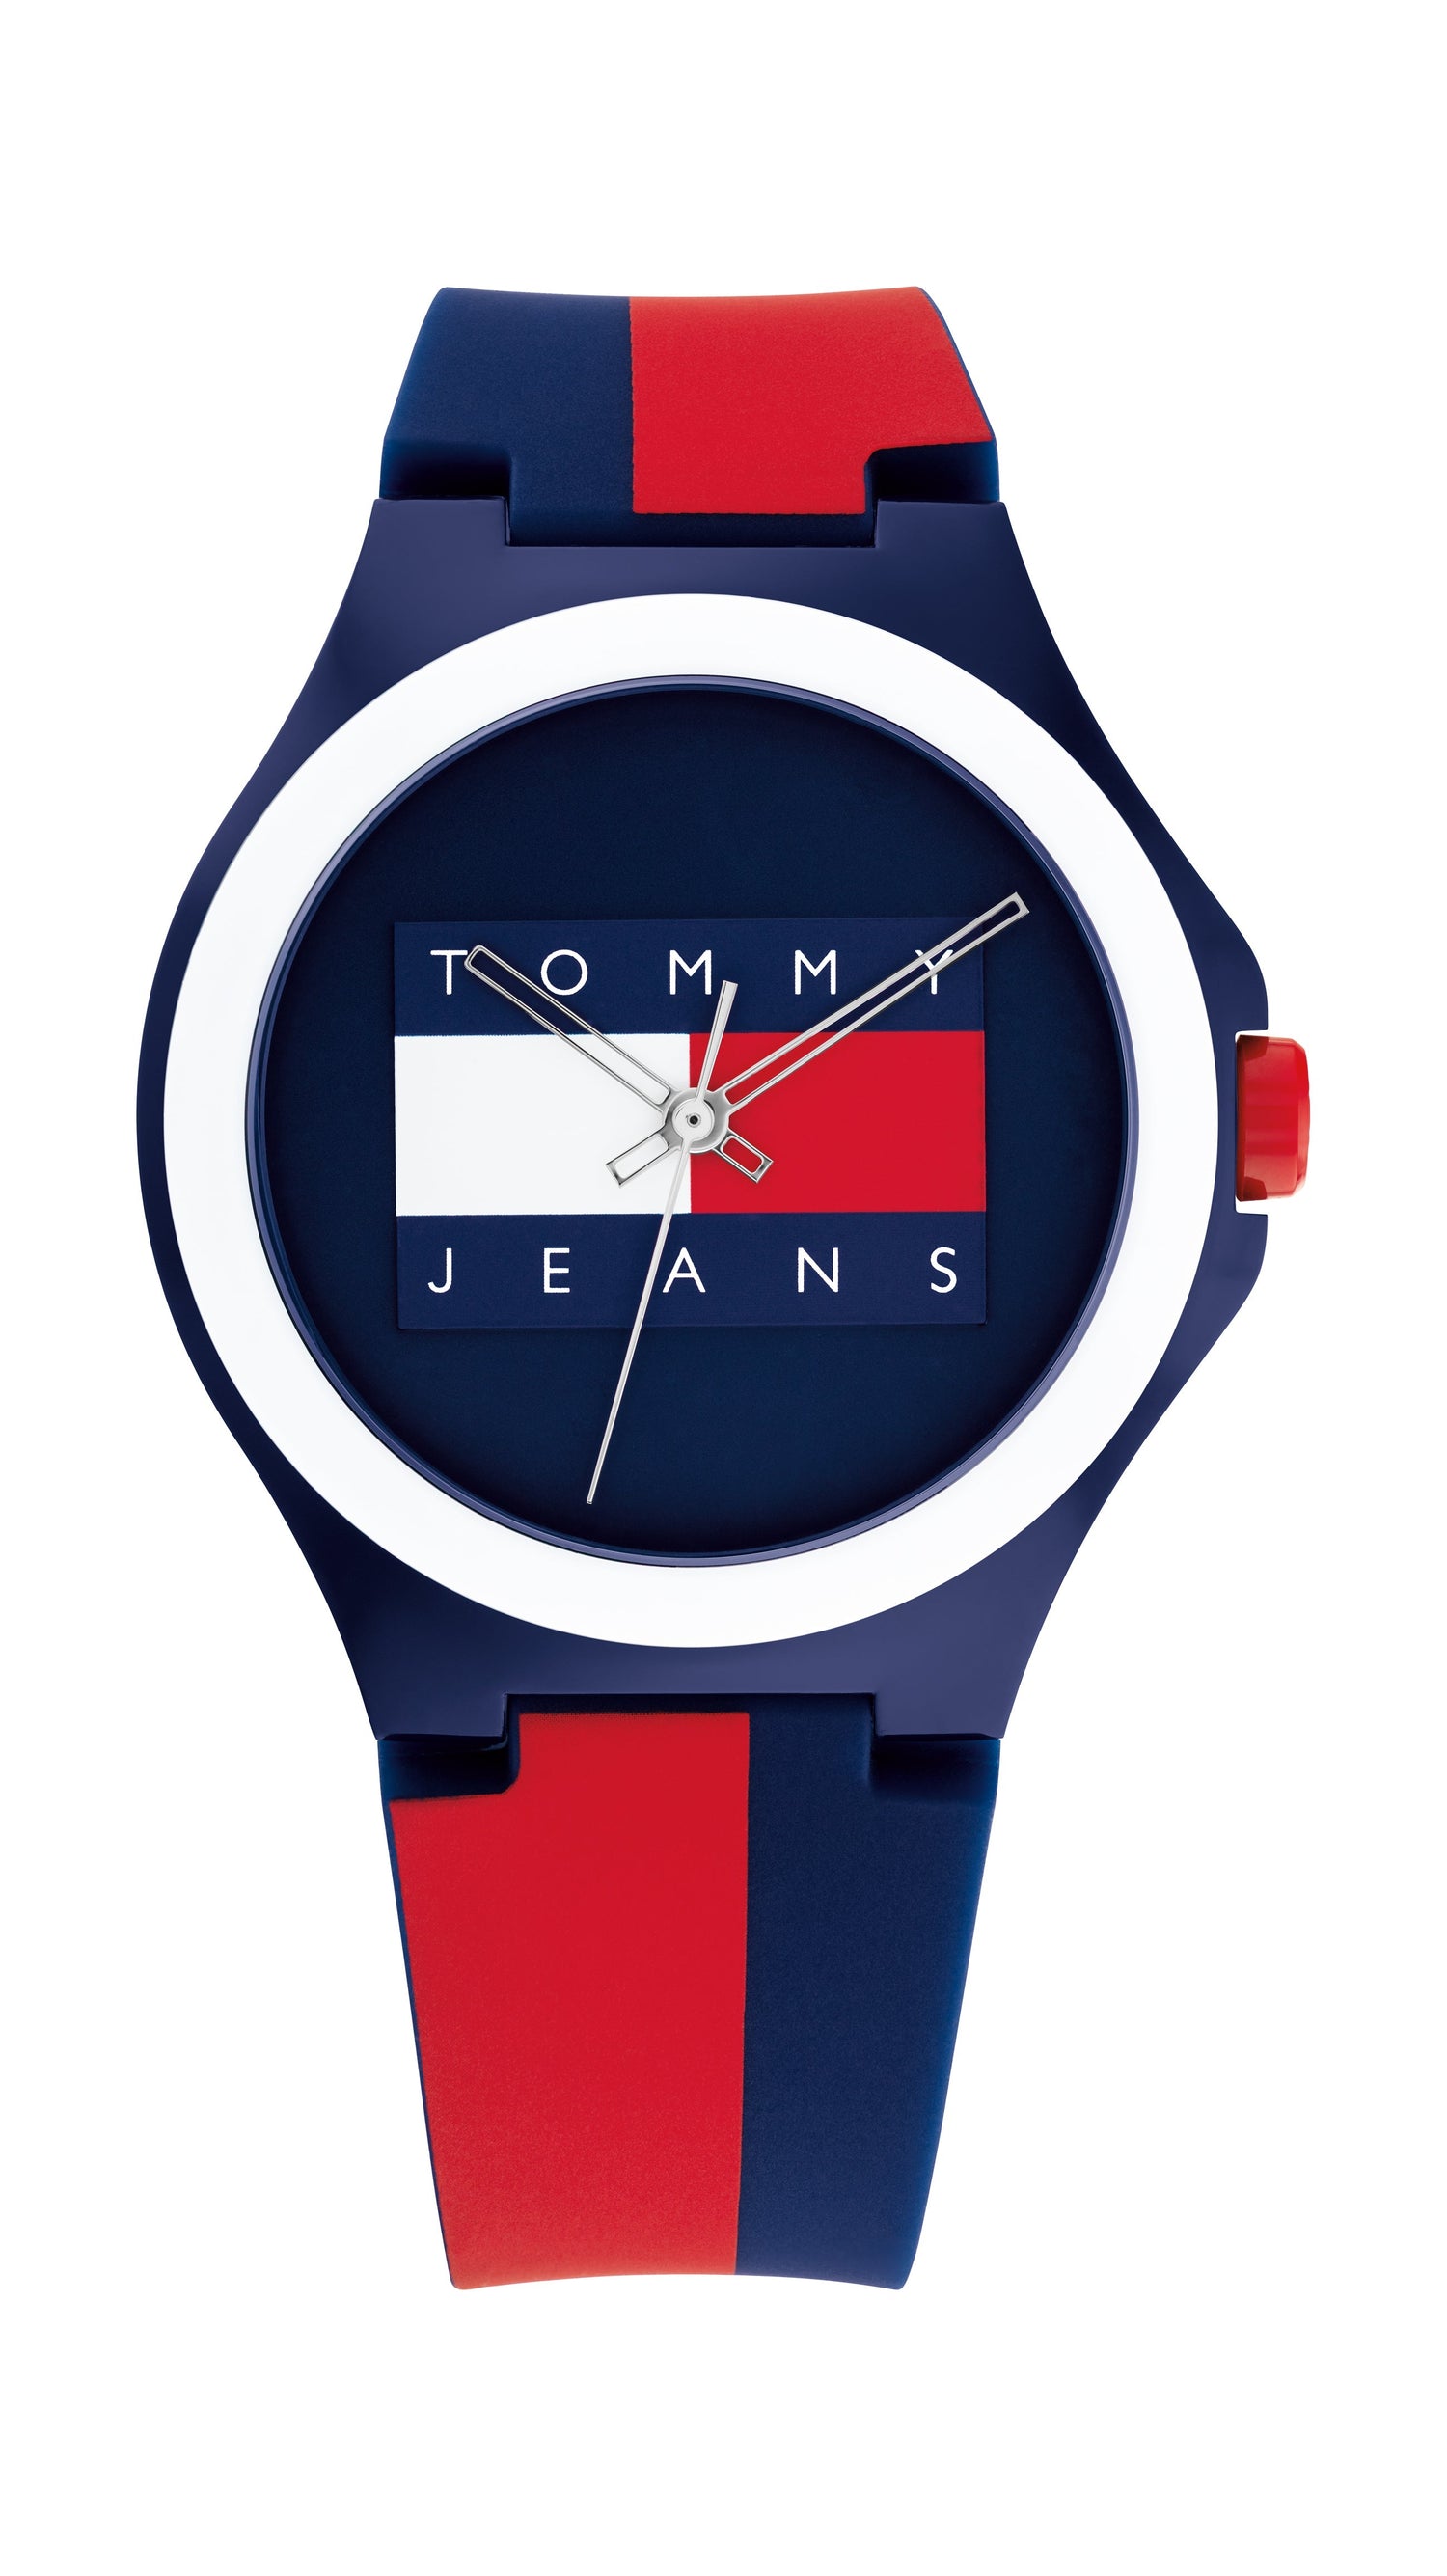 Tommy Hilfiger Berlin Red and Blue Men's Watch 1720025 Watches Tommy Hilfiger 